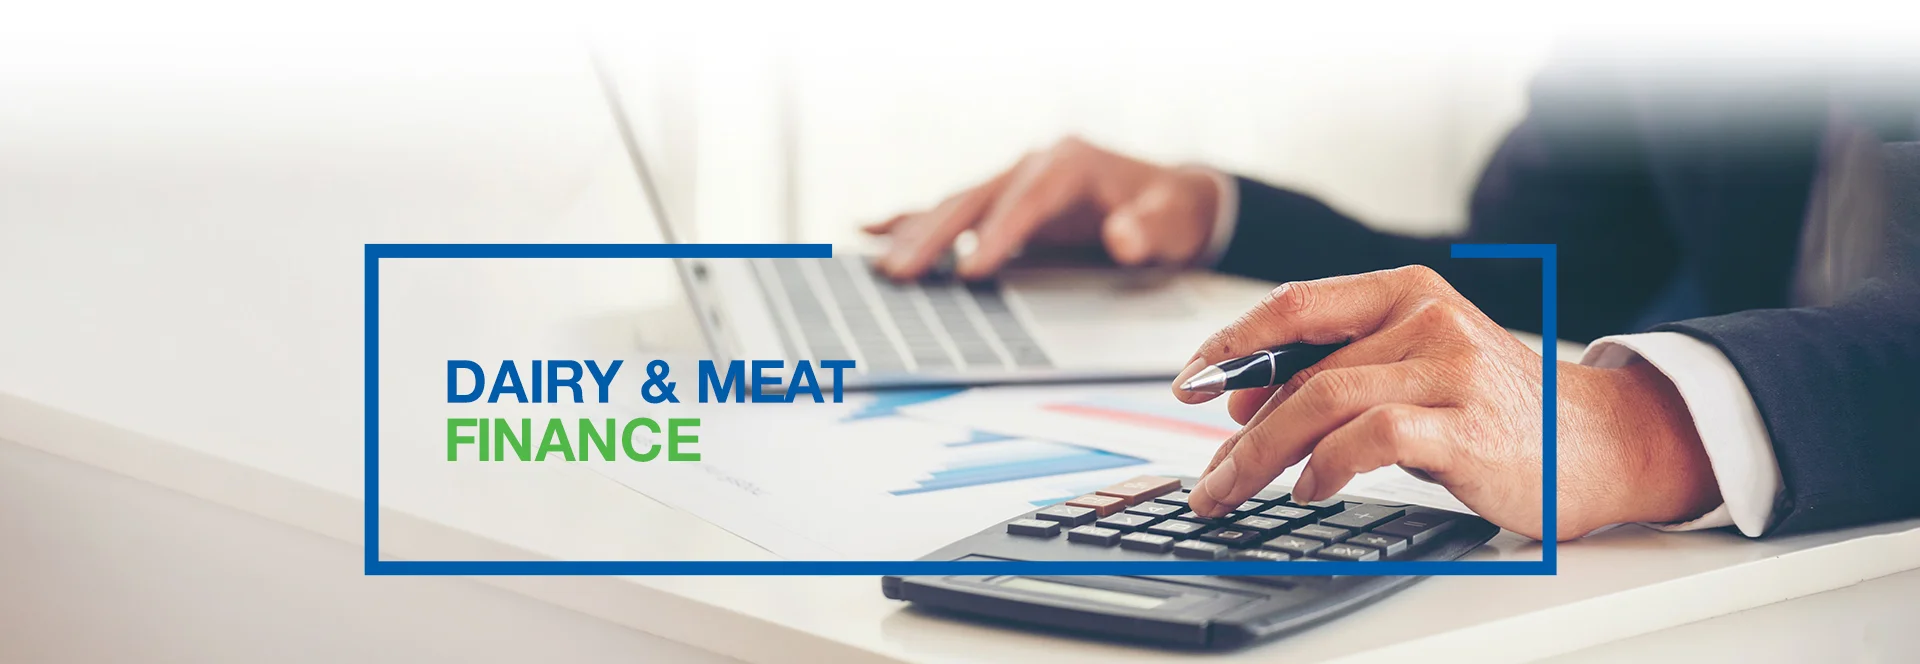 Dairy and Meat Finance